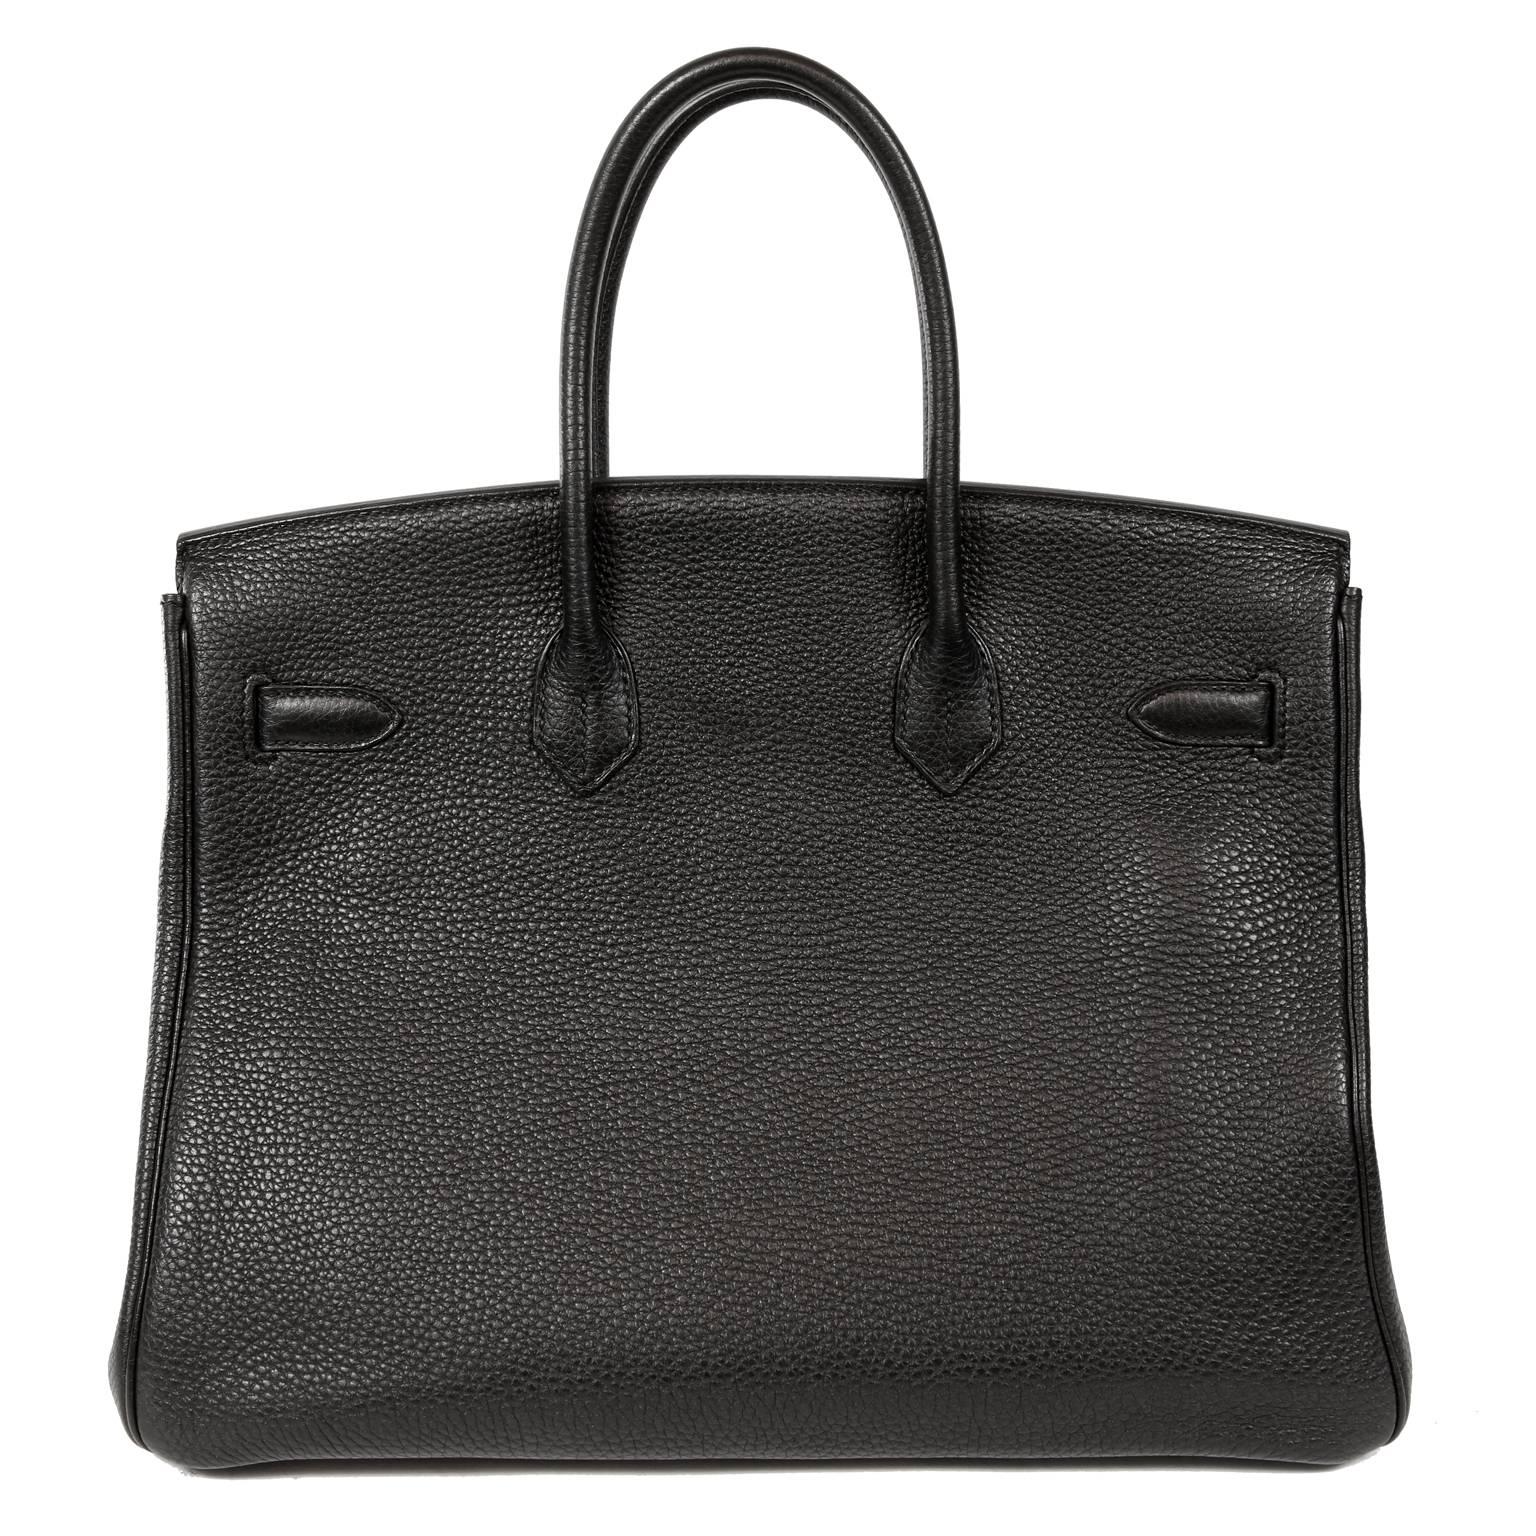 Hermès Black Togo Leather 35 cm Birkin Bag - Prisitne Condition
Possibly the most sought-after combination for the Birkin:  Black Togo with Palladium hardware.  Stitched entirely by hand, waitlists for the coveted Hermès Birkin can exceed a year.